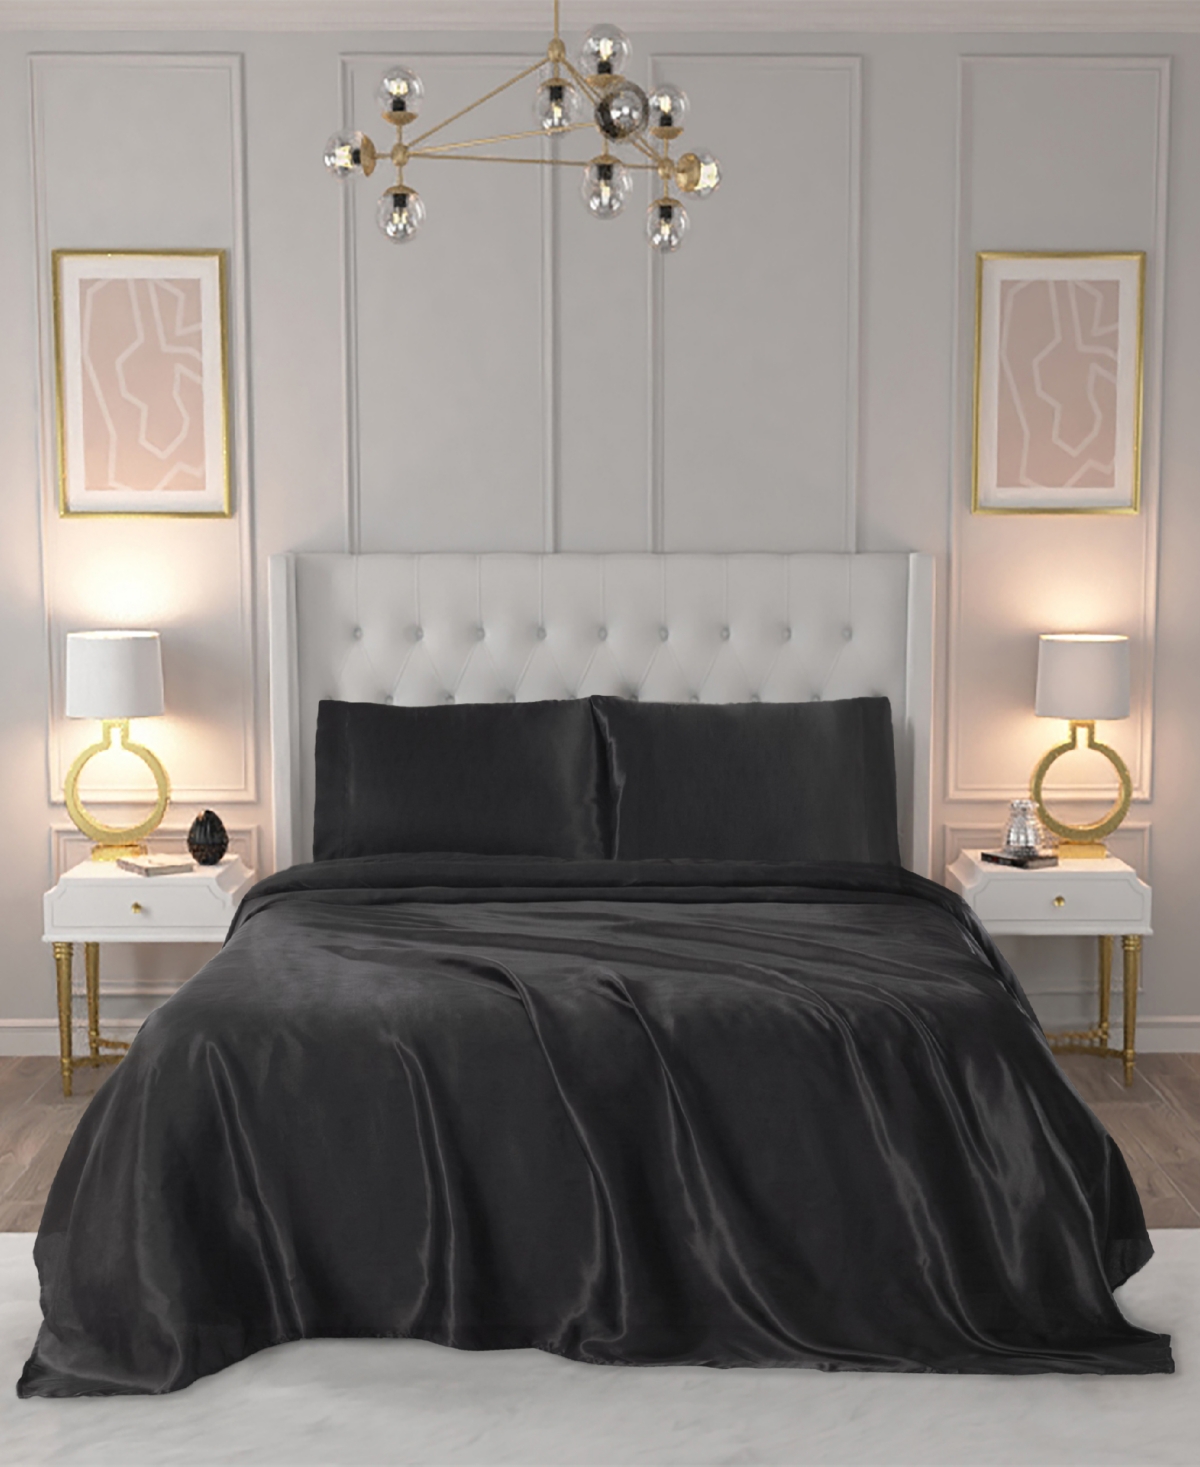 Juicy Couture Satin 3 Piece Sheet Set, Twin In Black